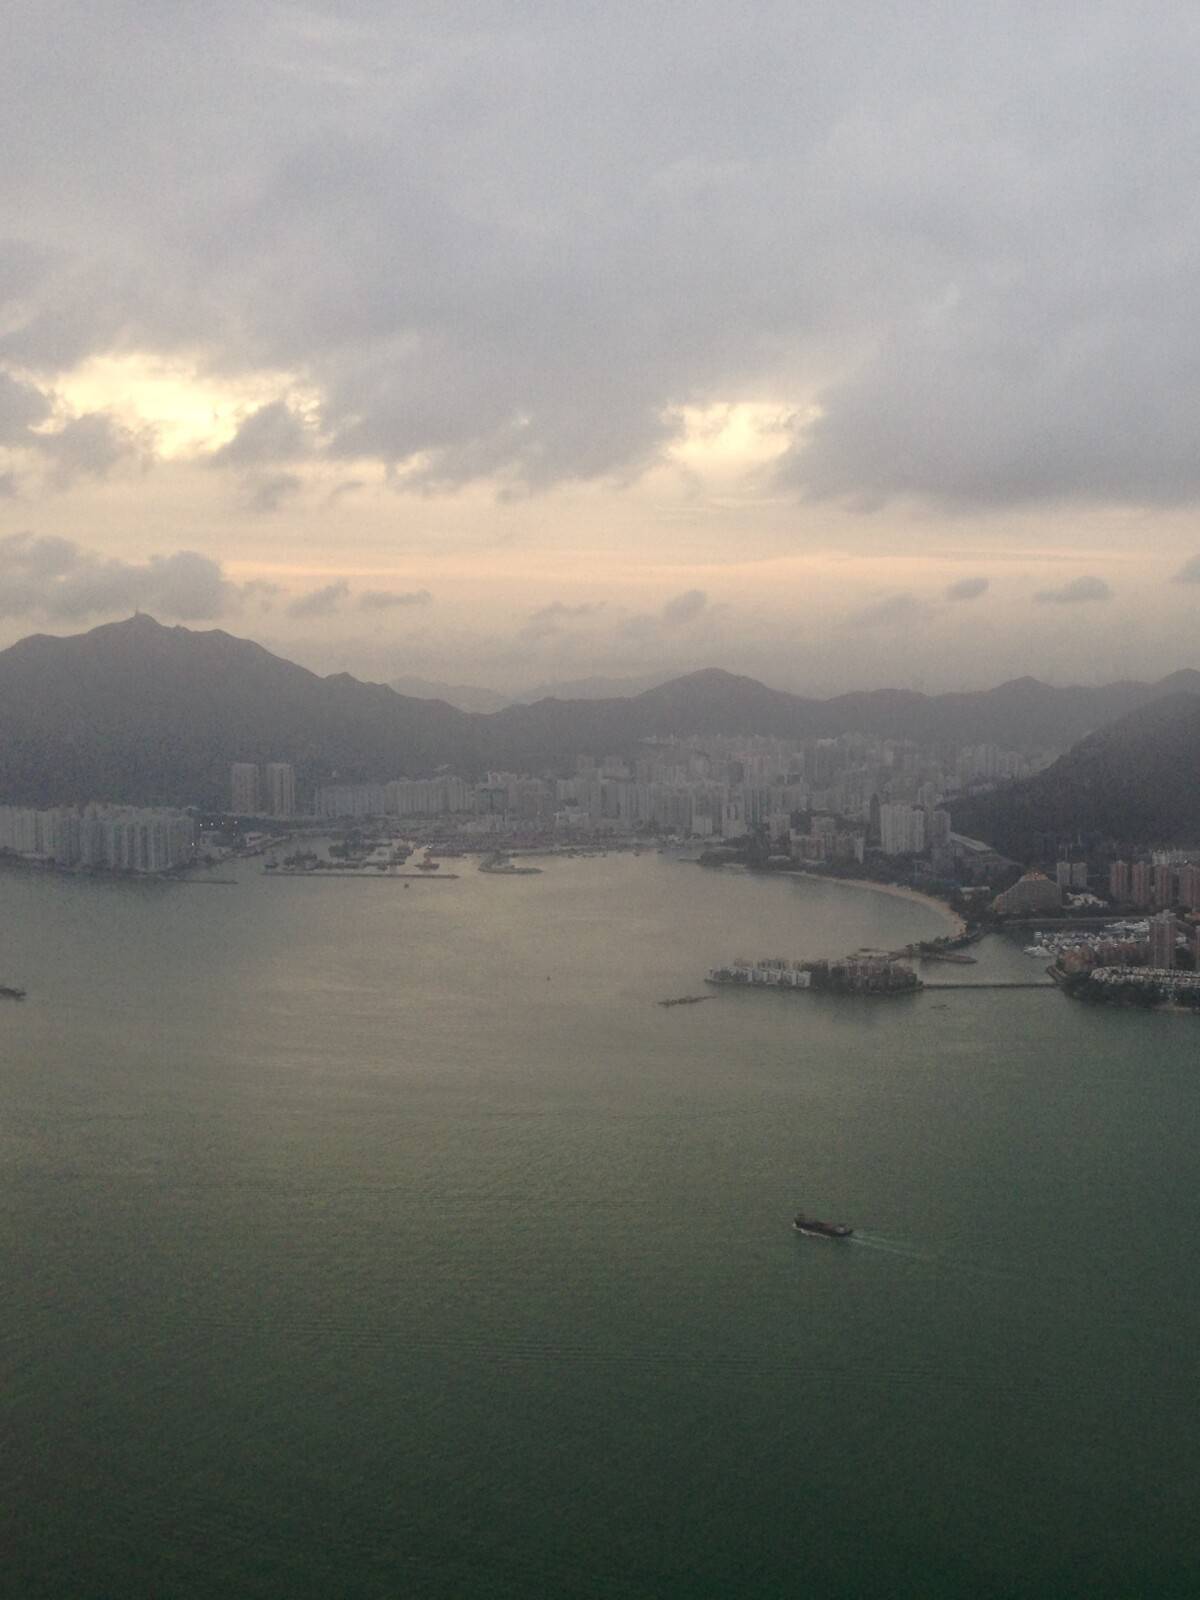 Hong Kong from the plane showing an inlet of beaches surrounded by water on one side and high rises on the other